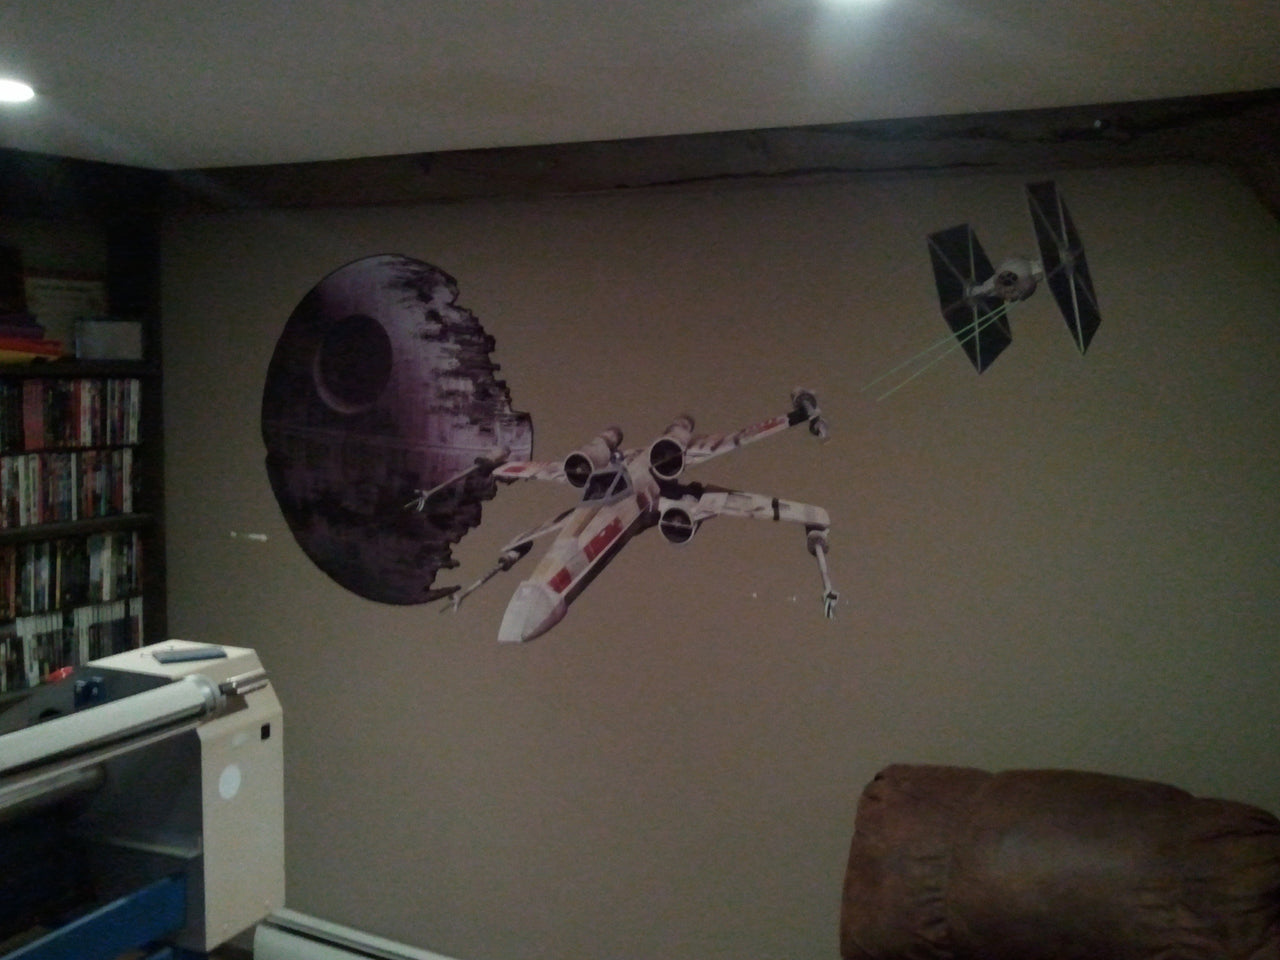 Star Wars Fathead X Wing Fighter Graphic Wall Décor - TshirtNow.net - 4